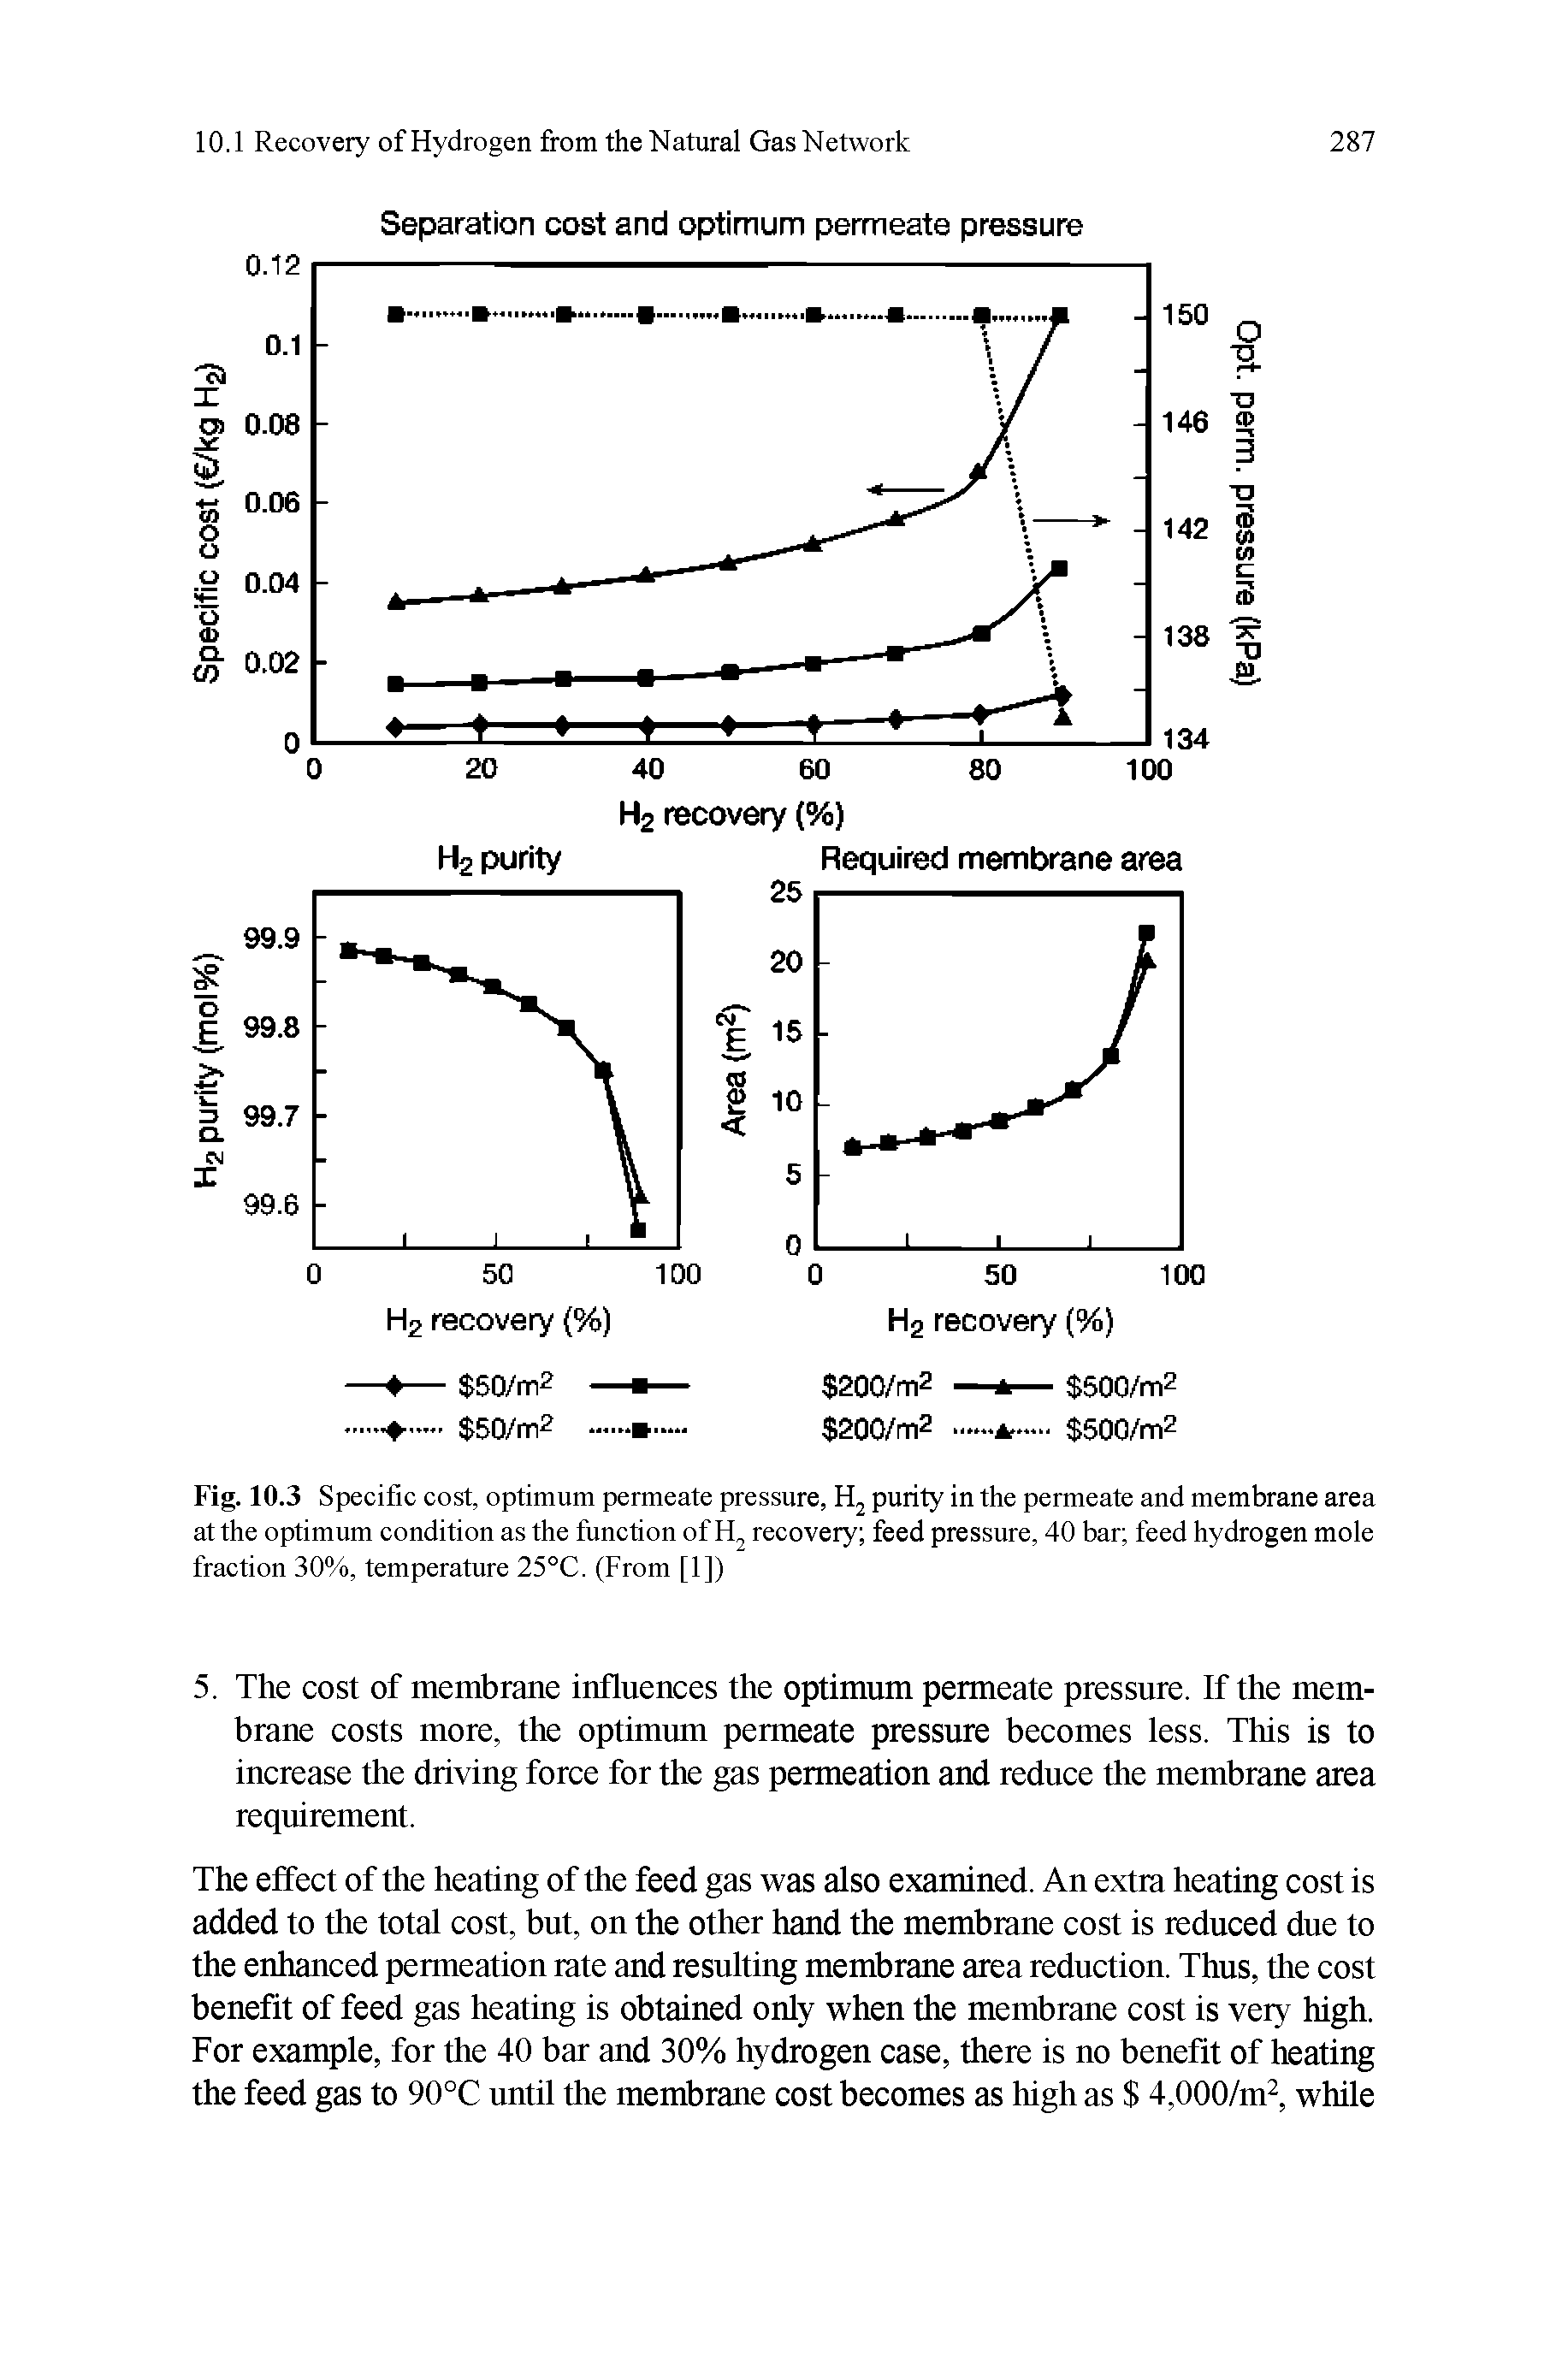 Fig. 10.3 Specific cost, optimum permeate pressure, Hj purity in the permeate and membrane area at the optimum condition as the function of recovery feed pressure, 40 bar feed hydrogen mole fraction 30%, temperature 25°C. (From [1])...